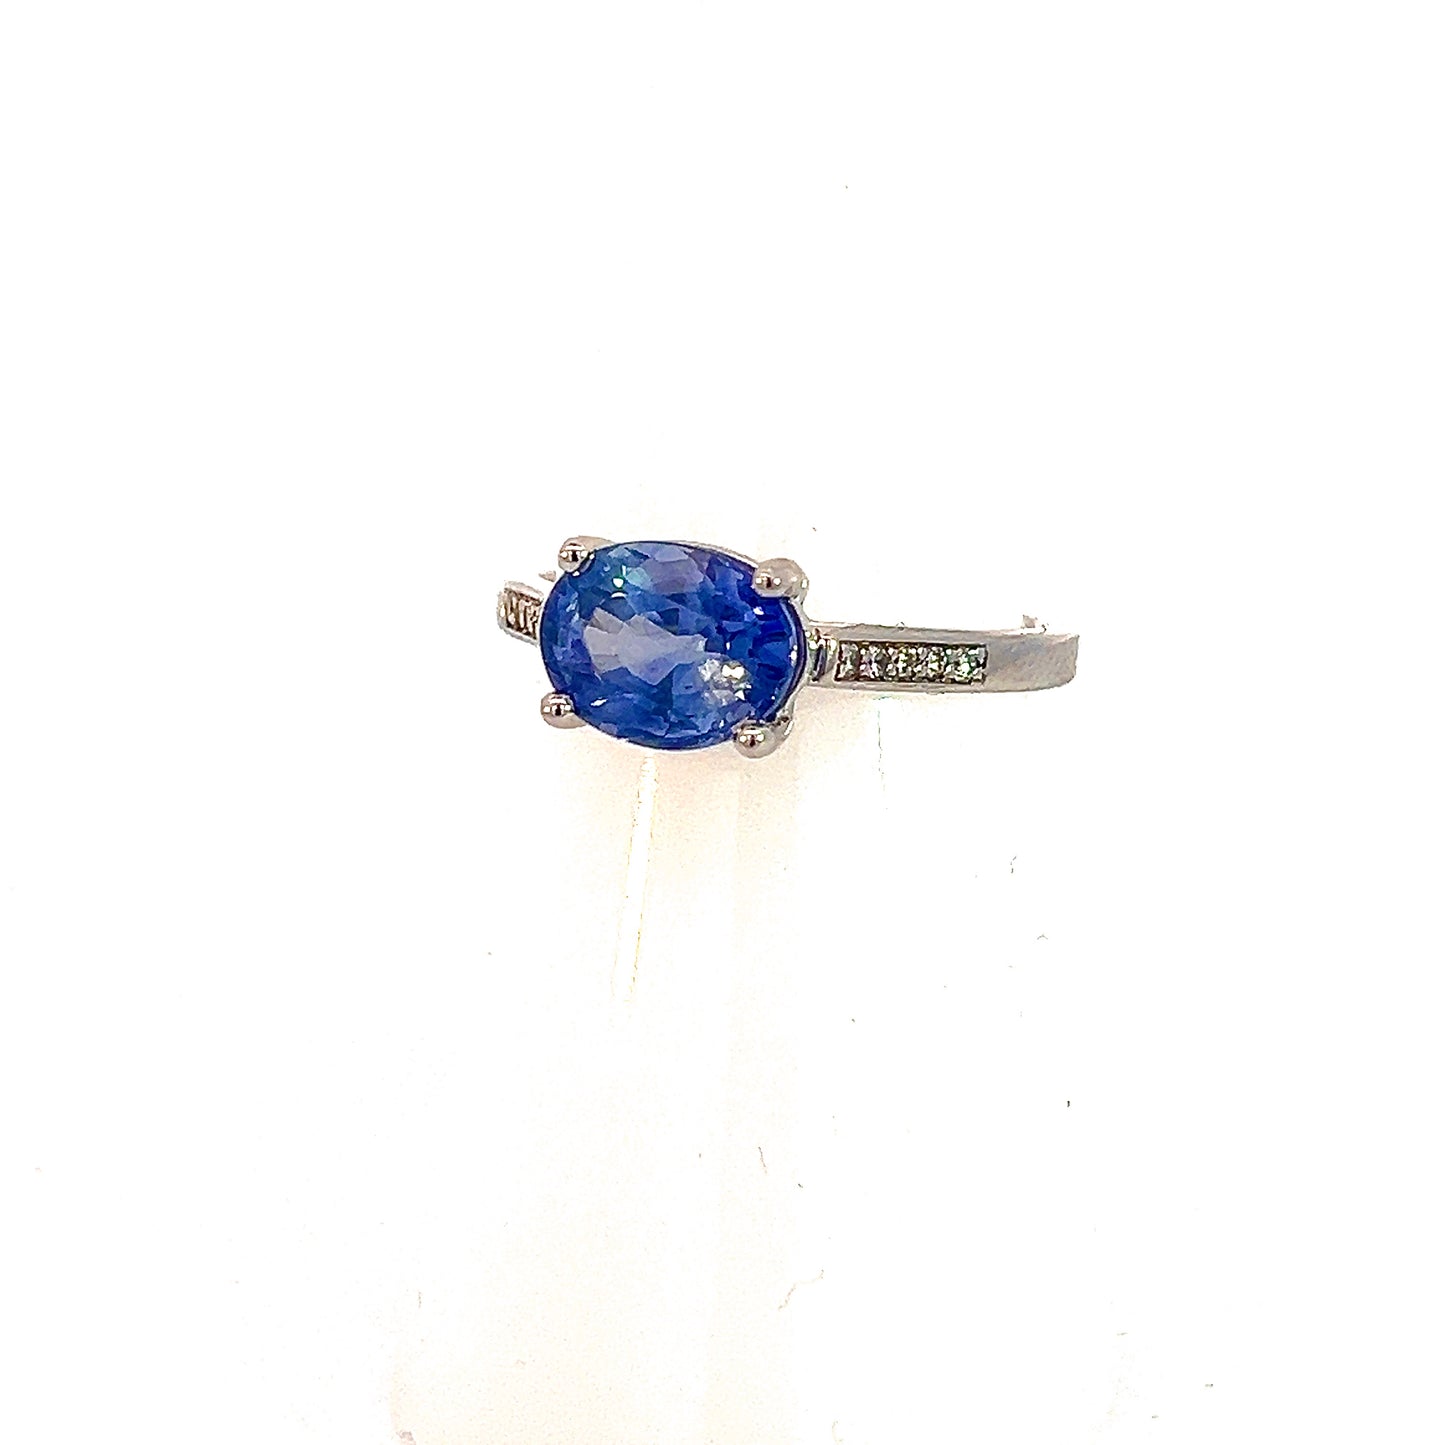 Natural Sapphire Diamond Ring 6.5 14k White Gold 2.36 TCW Certified $3,950 310592 - Certified Fine Jewelry